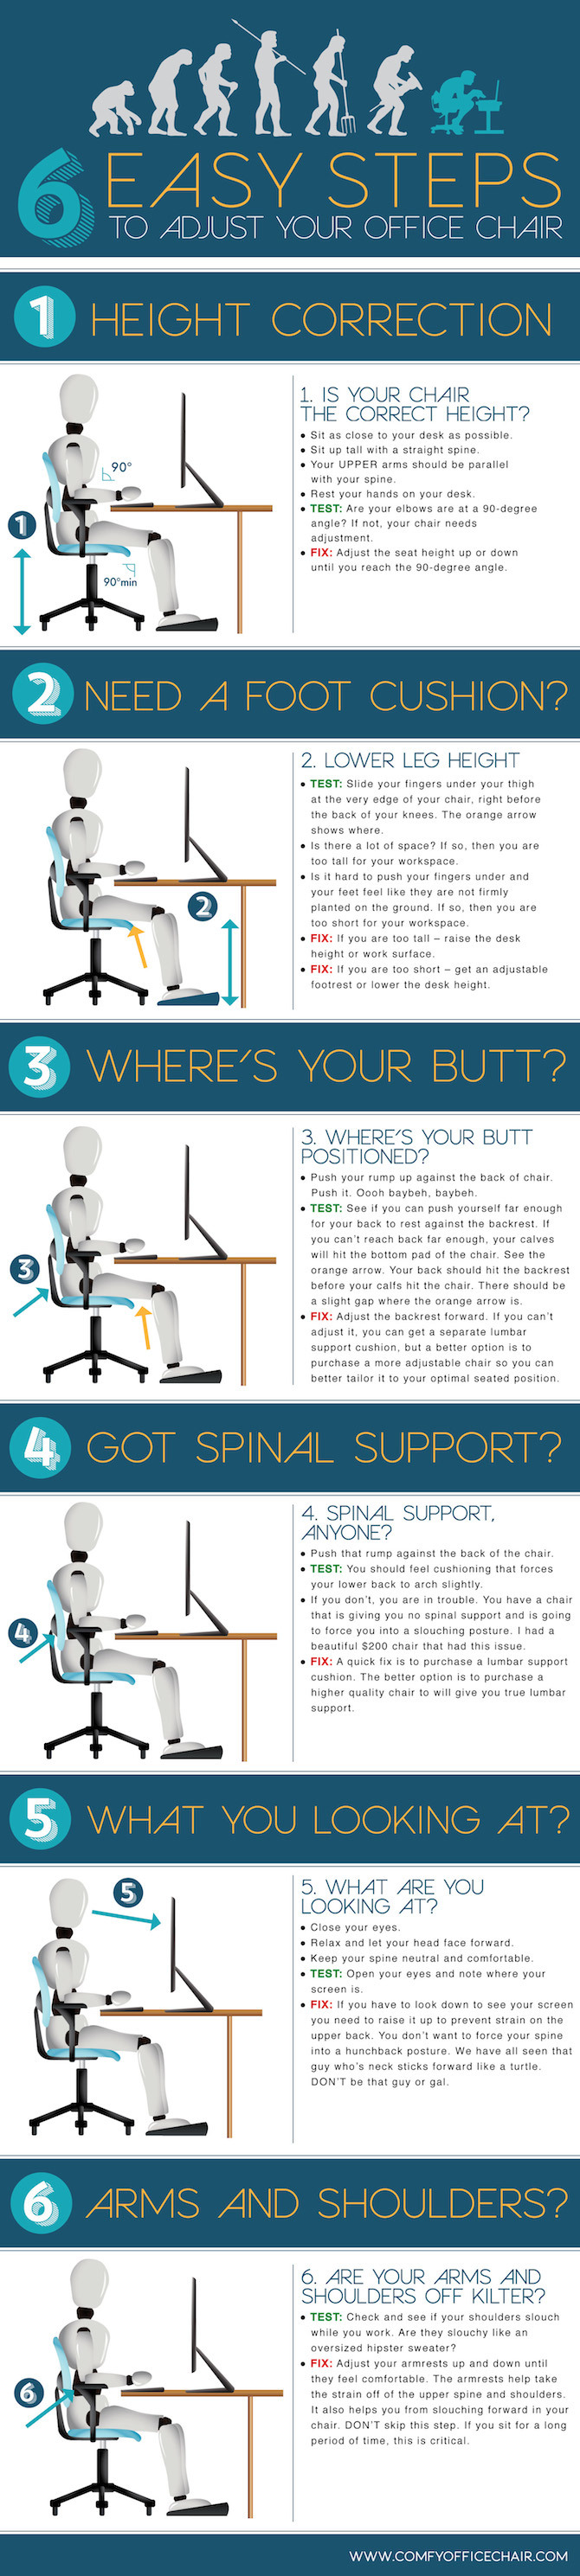 6 steps to adjusting your office chair